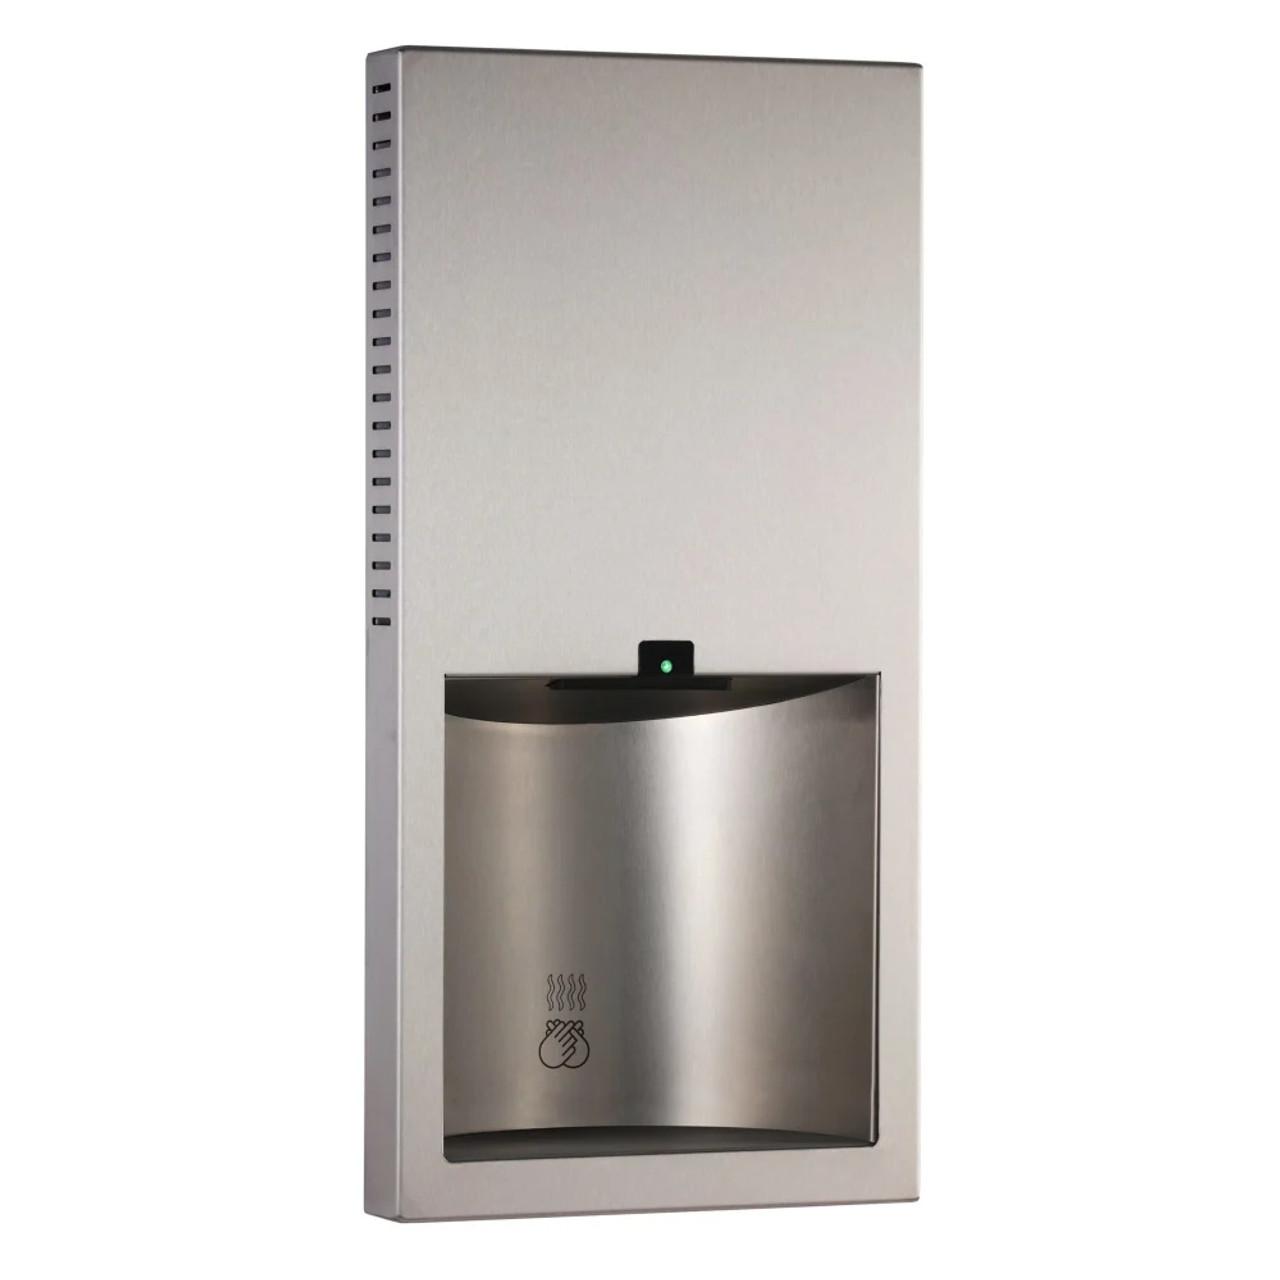 Bobrick Automatic Recessed Hand Dryer - 17 Second Dry Time, Stainless, 115V - Chicken Pieces